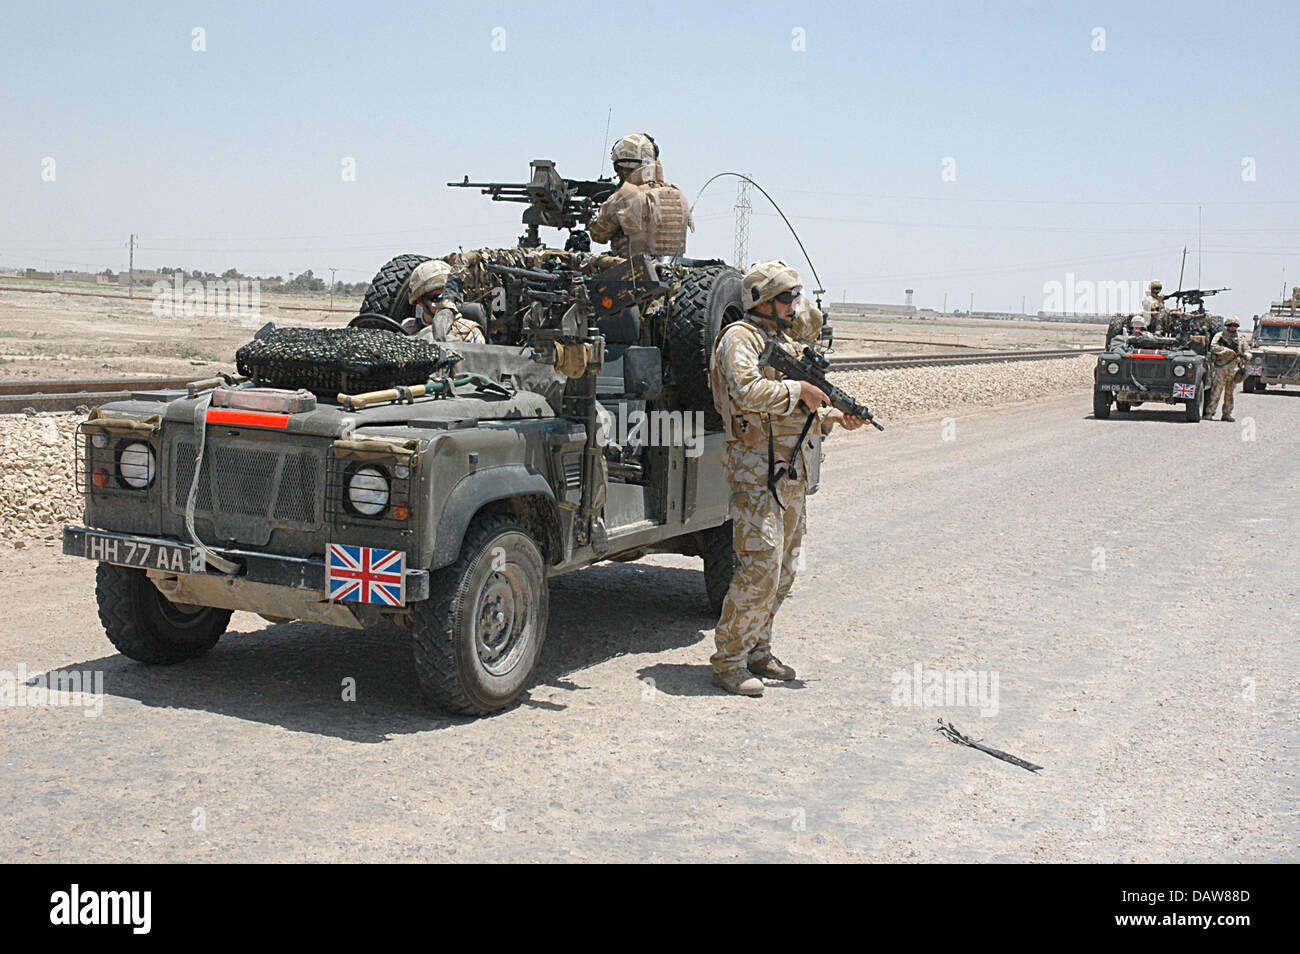 (dpa file) Soldiers of the 1st Queen's Dragoon Guards pictured during a Long Range Desert Patrol in Iraq, June 2006. The soldiers patrol with Land Rover 110 XD Wolf WMIK (Weapon Mount Installation Kit) equipped with two 7.62mm General Purpose Machine Guns (GPMG). Photo: Carl Schulze Stock Photo